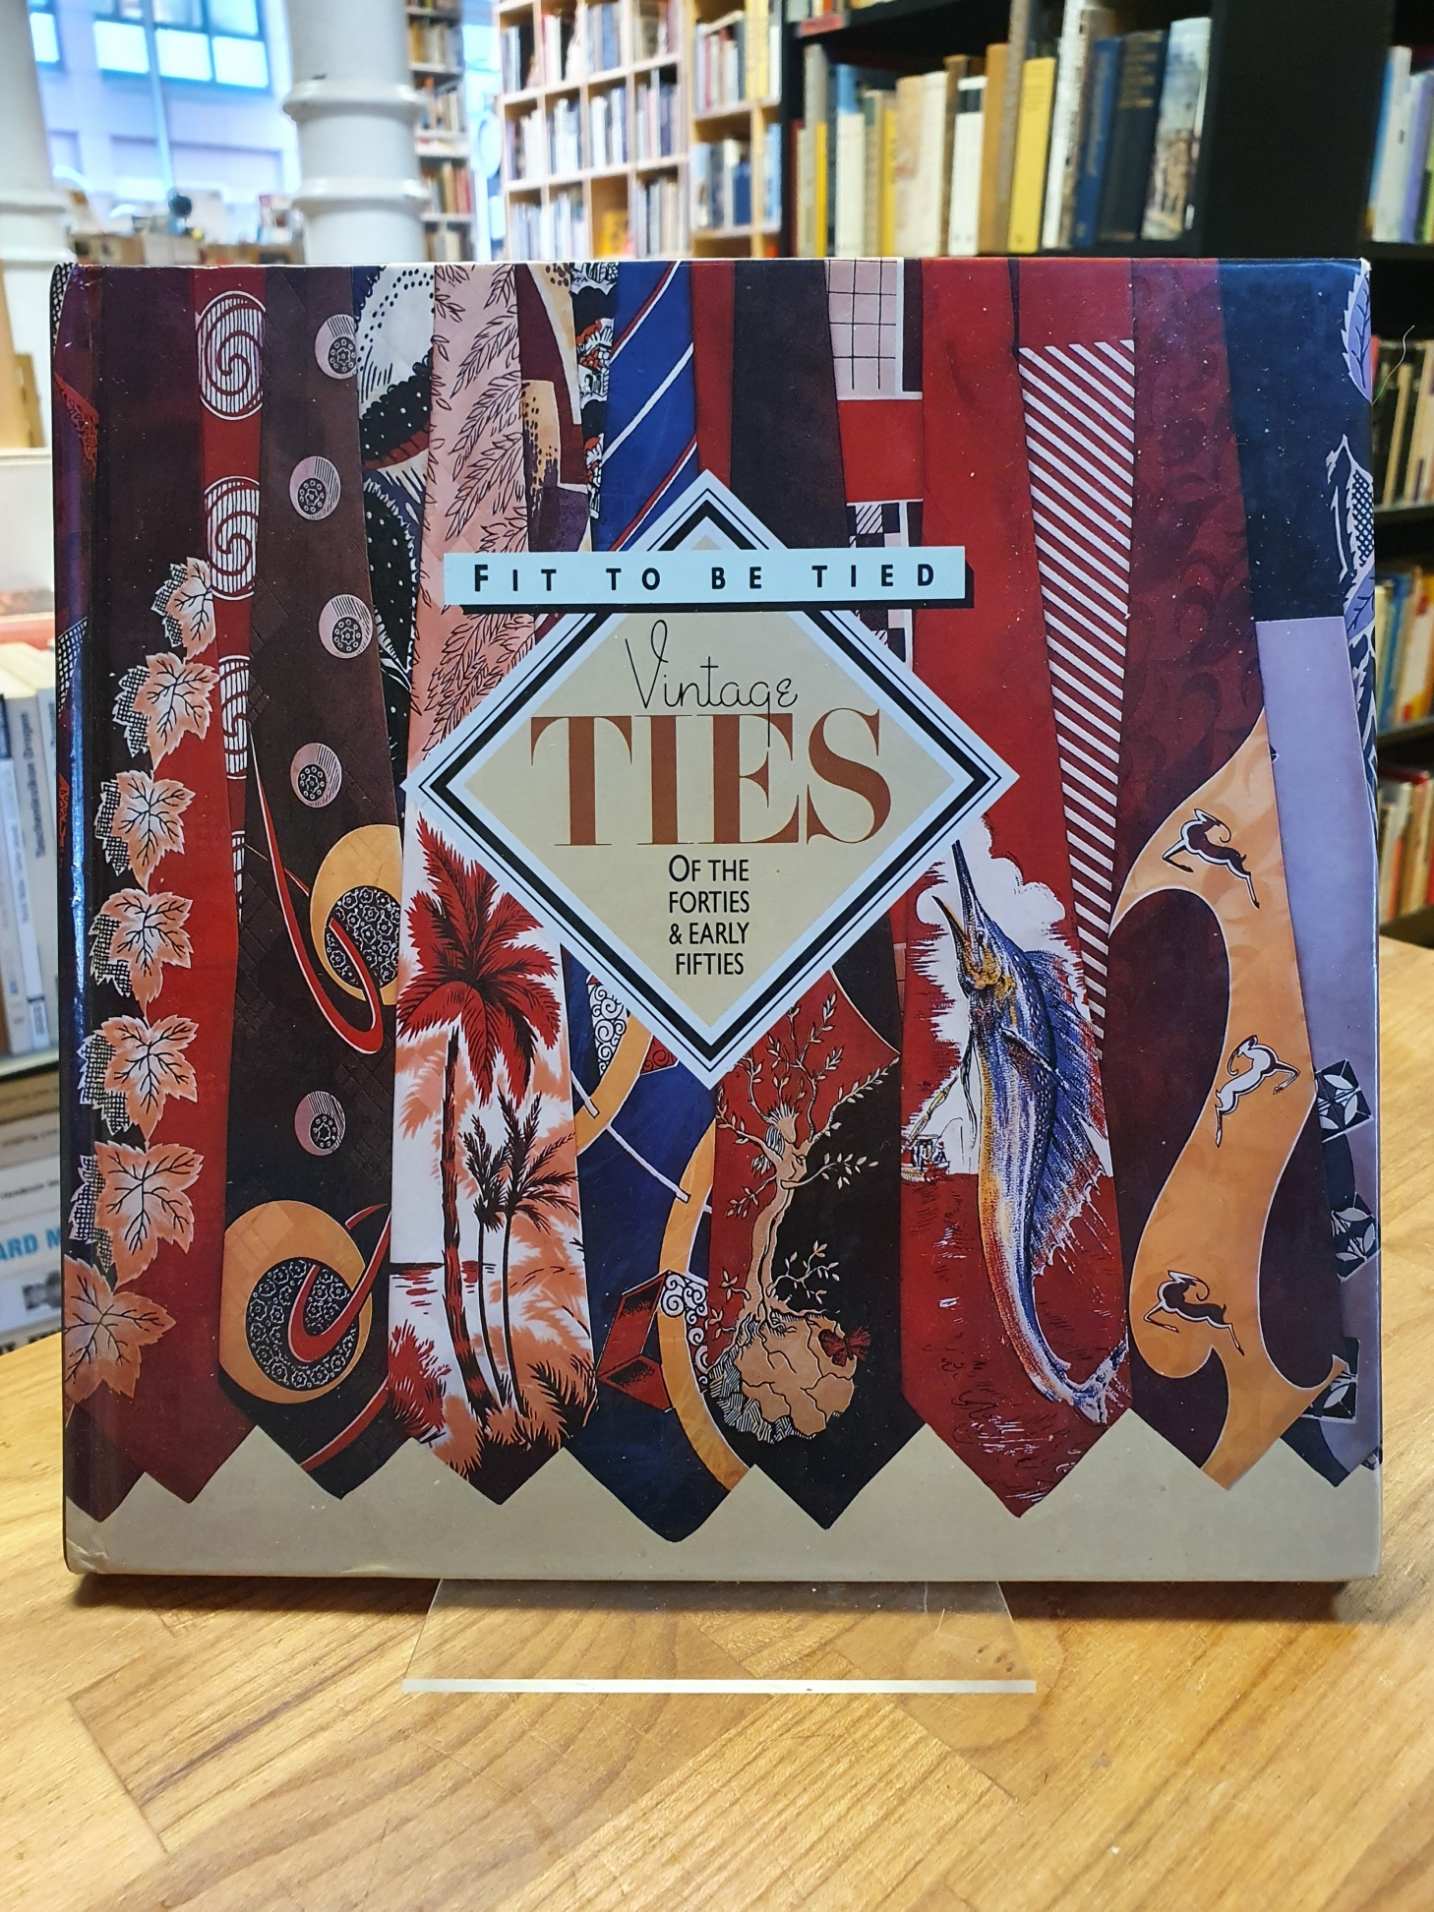 Dyer, Fit To Be Tied – Vintage Ties Of The Forties And Early Fifties,